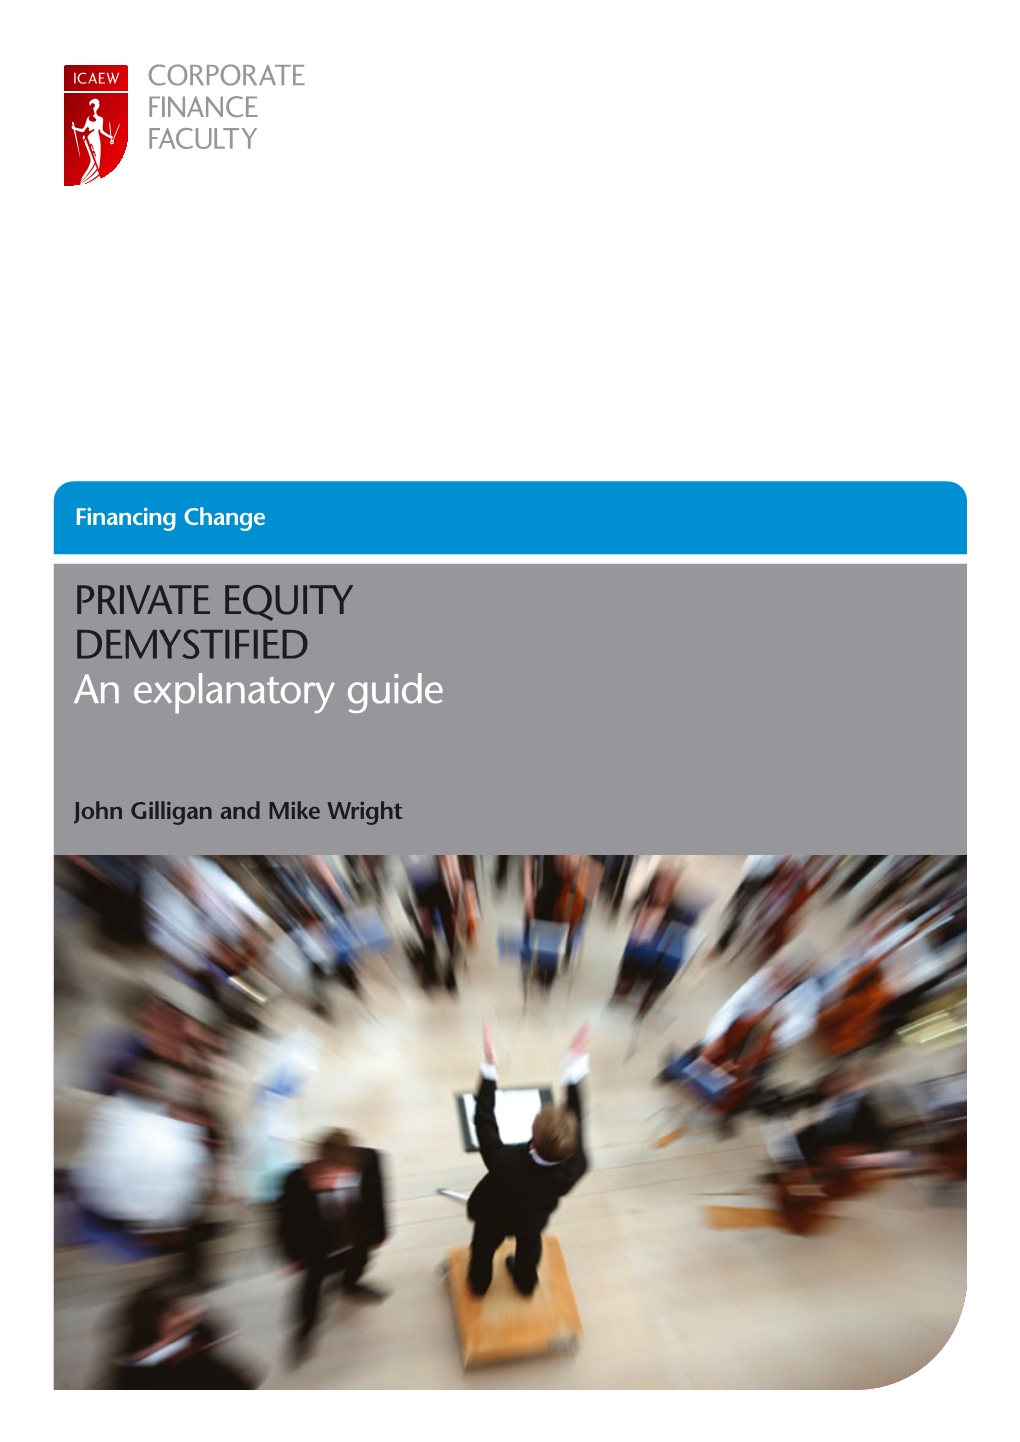 PRIVATE EQUITY DEMYSTIFIED an Explanatory Guide